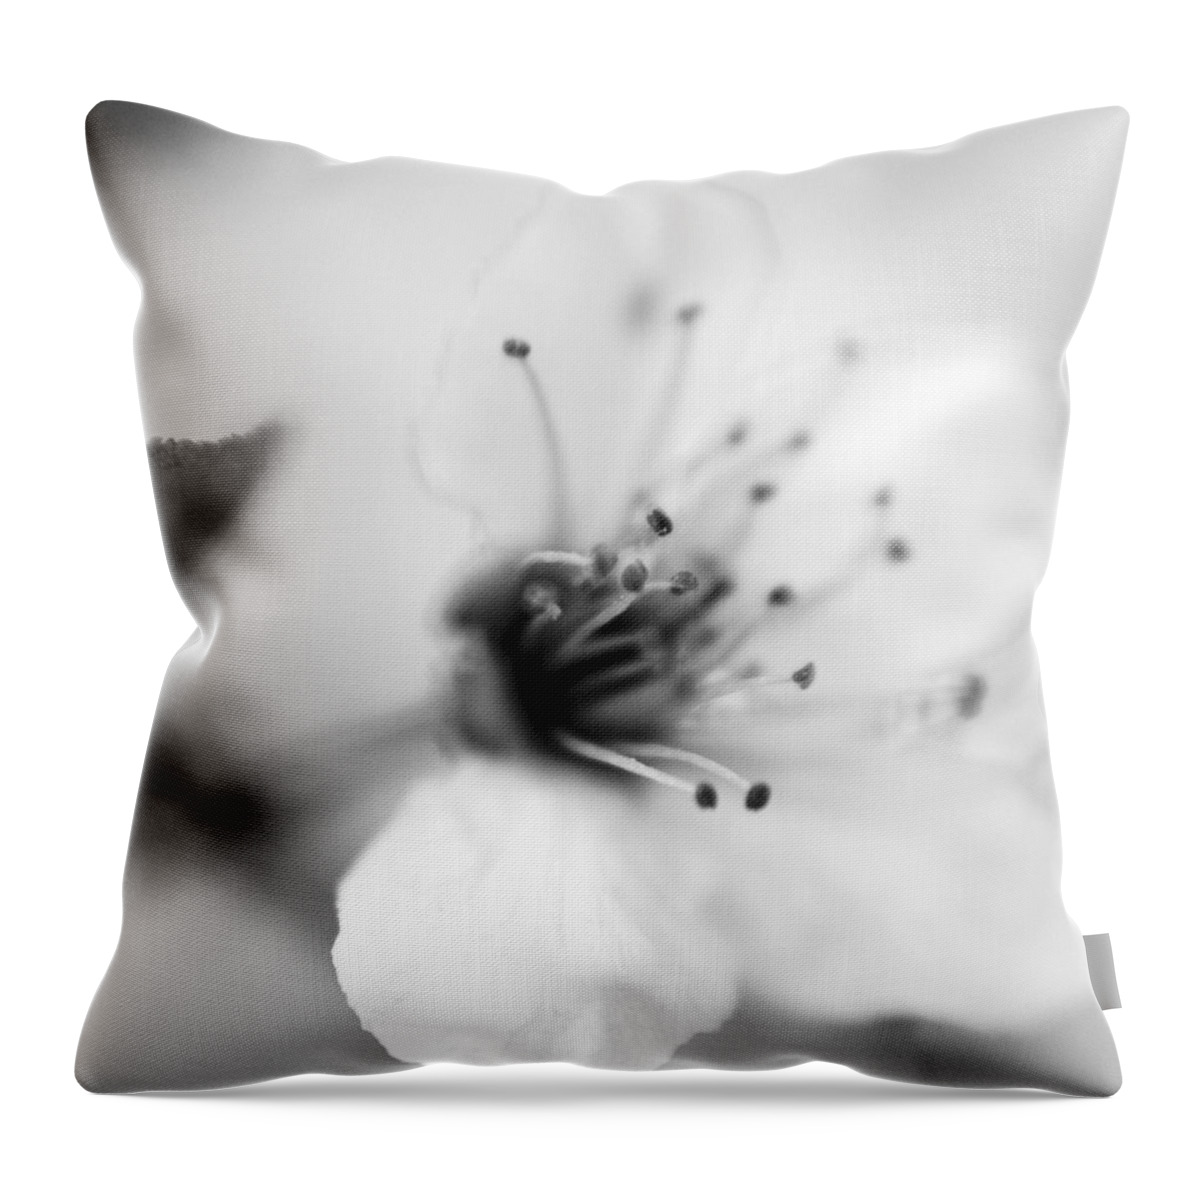 B&w Throw Pillow featuring the photograph Spring Blooms 0134 by Timothy Bischoff